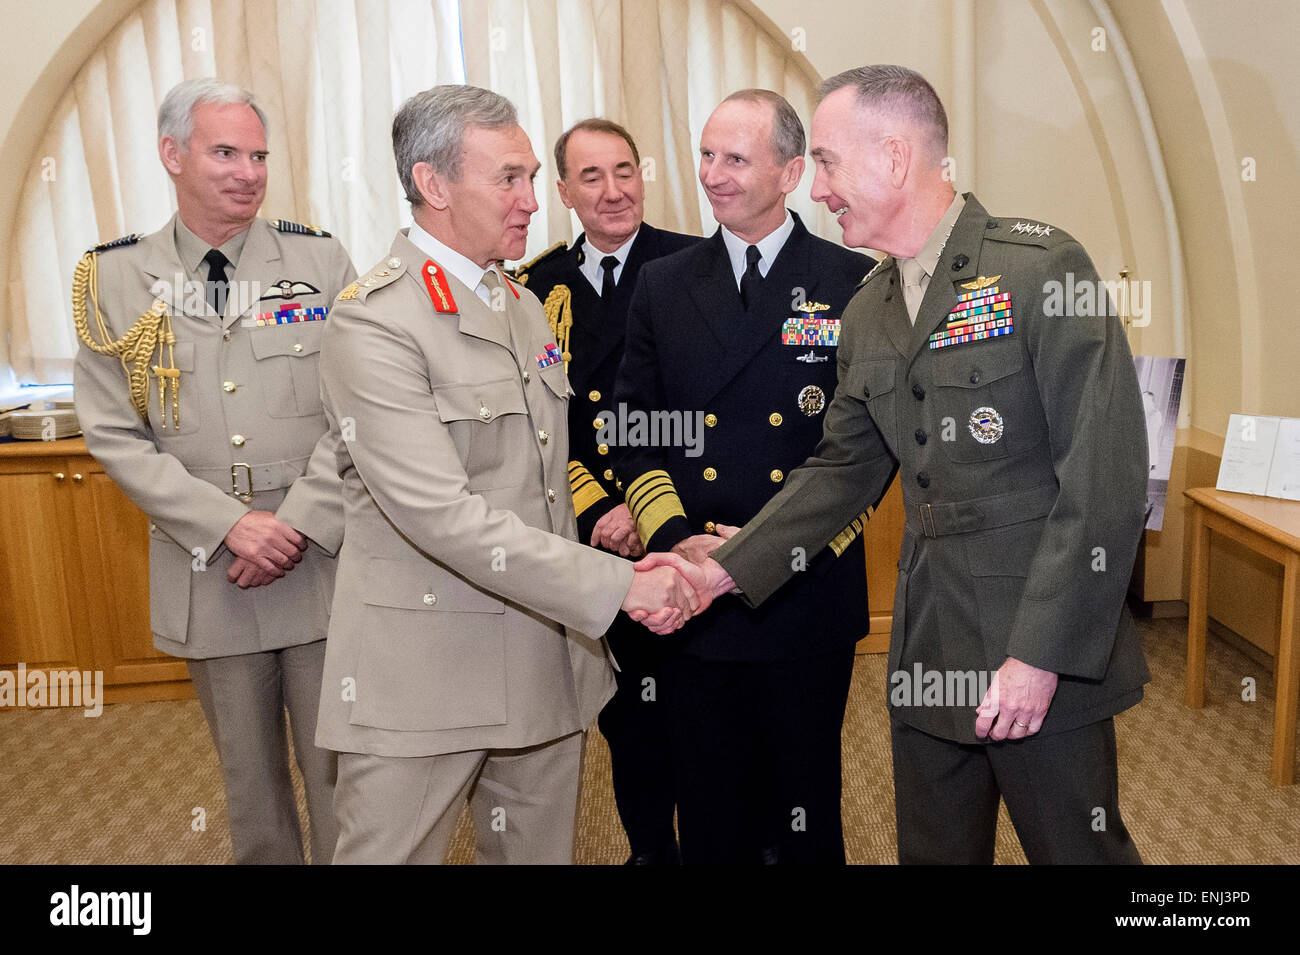 Washington, DC, USA. 05th May, 2015. British Chief of the Defence Staff Gen. Nick Houghton congratulates Commandant of the Marine Corps Gen. Joseph Dunford Jr. on his nomination to be the new chairman of the Joint Chiefs of Staff May 5, 2015 in Washington, D.C. Stock Photo